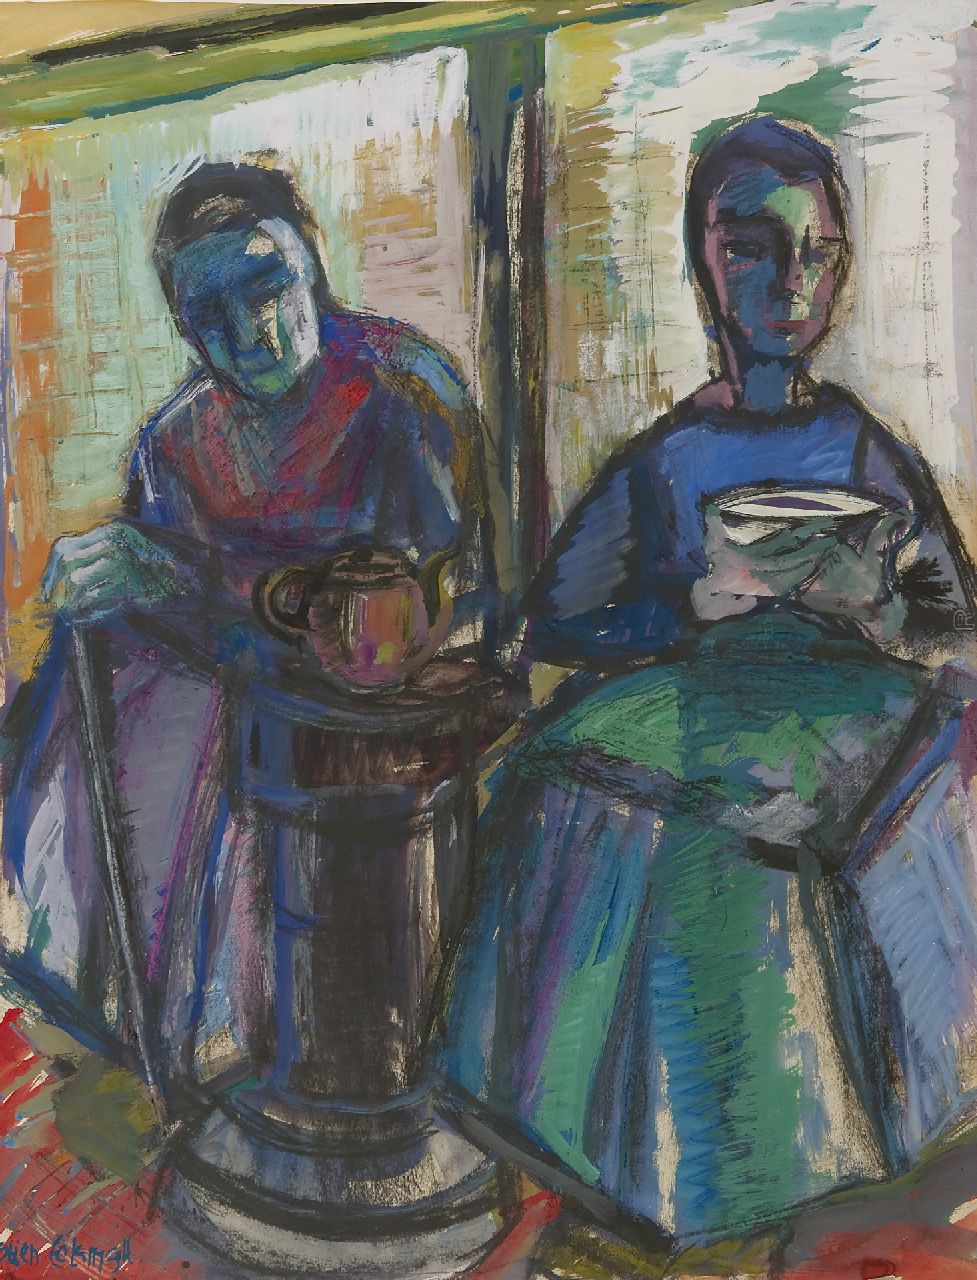 Eelsingh C.  | Christiana 'Stien' Eelsingh, Women near the stove, Staphorst, black chalk and gouache on paper 64.3 x 49.2 cm, signed l.l. and painted 1950-1955